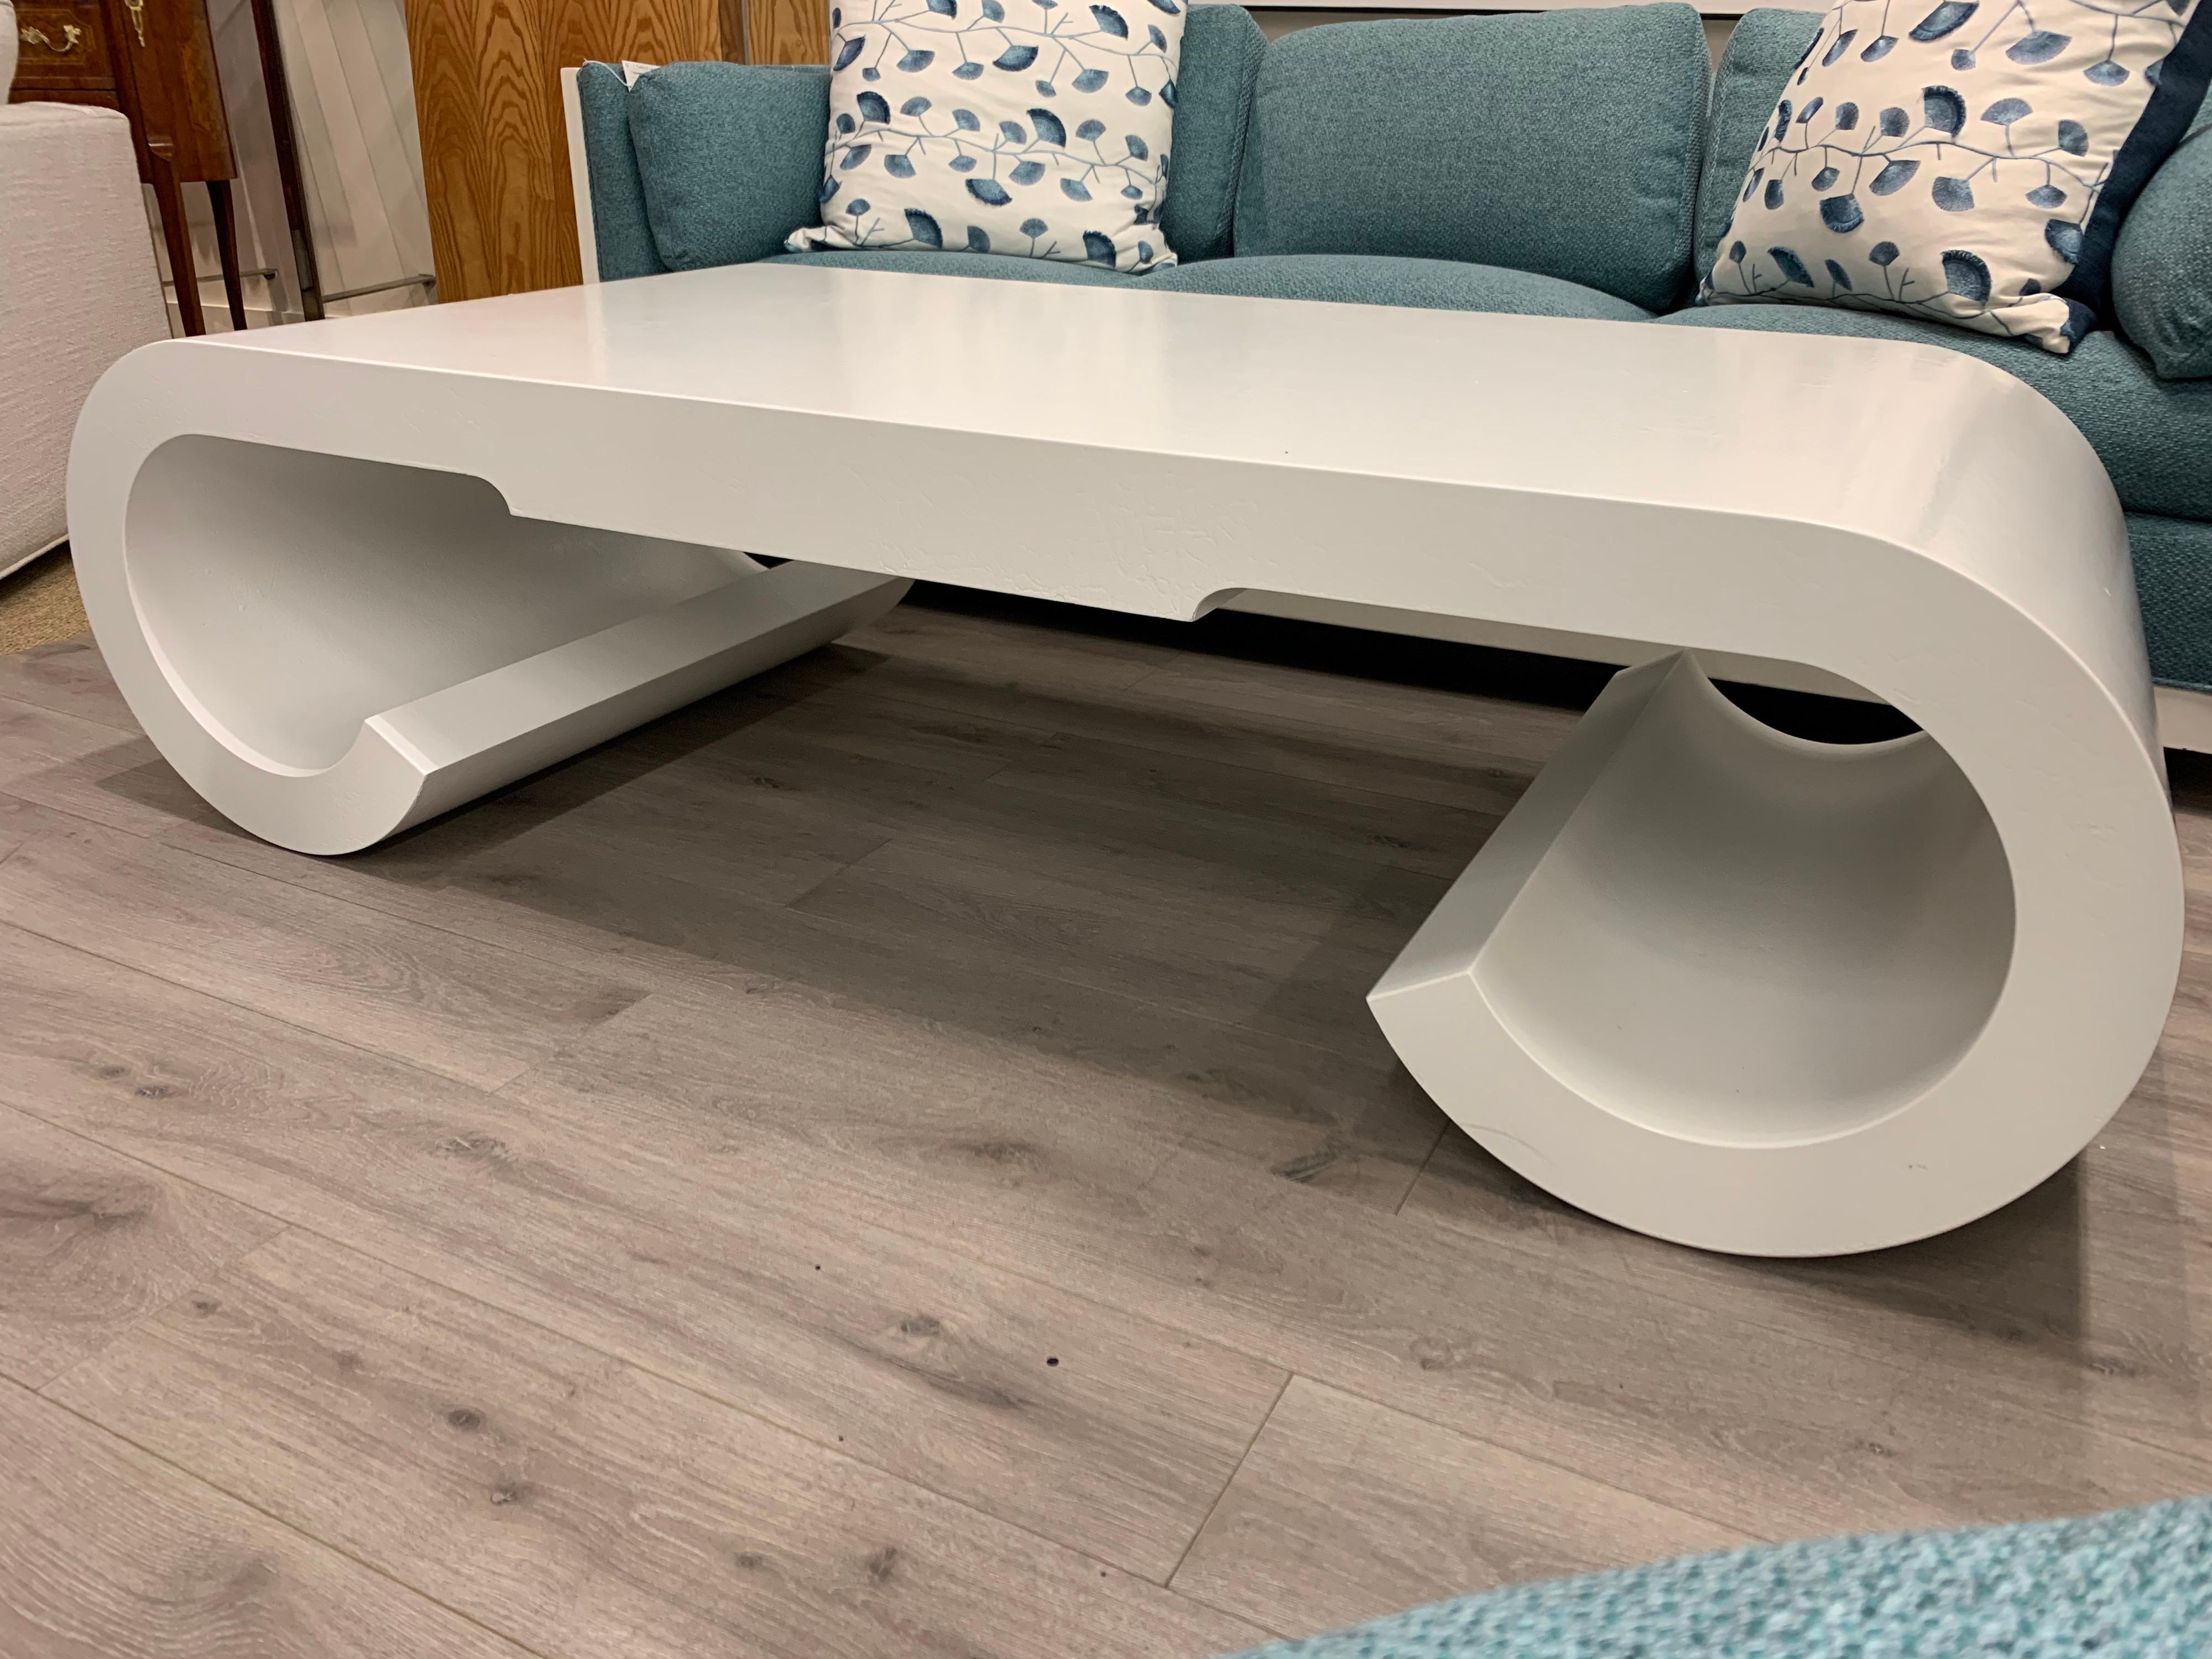 Mid-Century Modern Freshly Lacquered Large White Midcentury Sculptural Cocktail Coffee Table